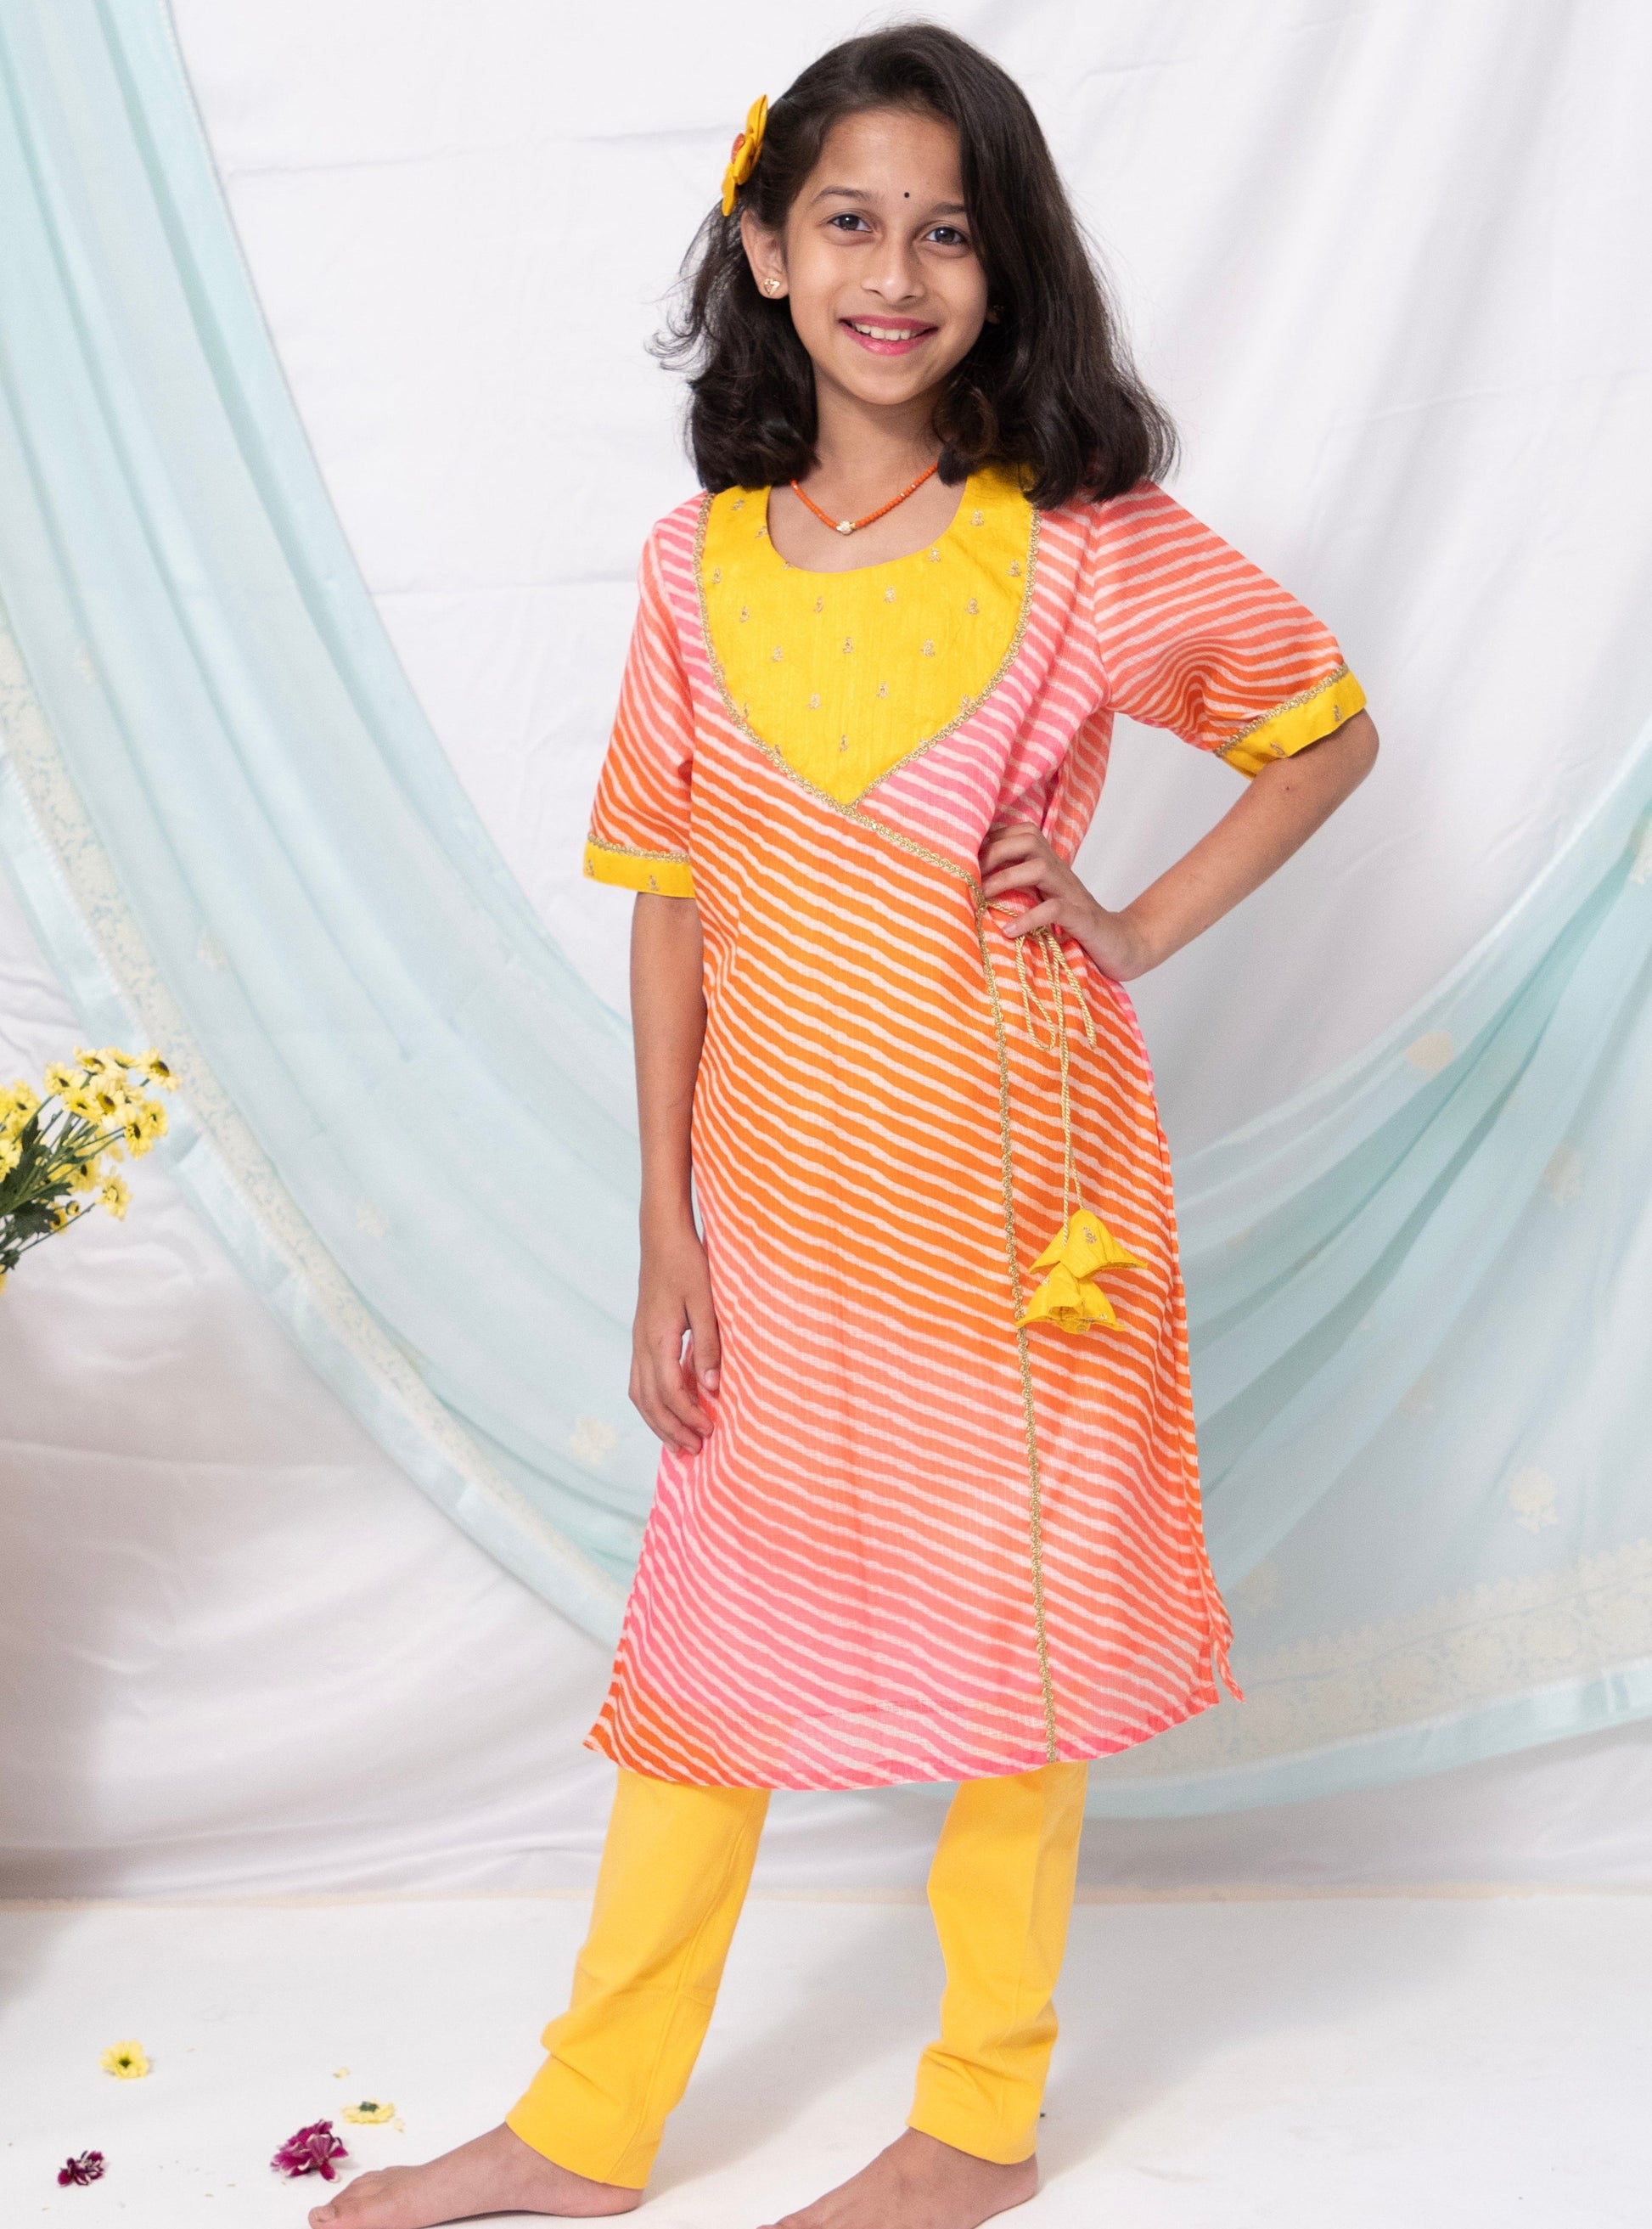 Pink and orange leheriya kotta chanderi kurti with yellow raw silk sequined yoke and flower shaped latkans is the perfect choice for any occasion, especially when paired with yellow leggings . Its elbow length sleeves with yellow highlights add a touch of elegance to the overall look.